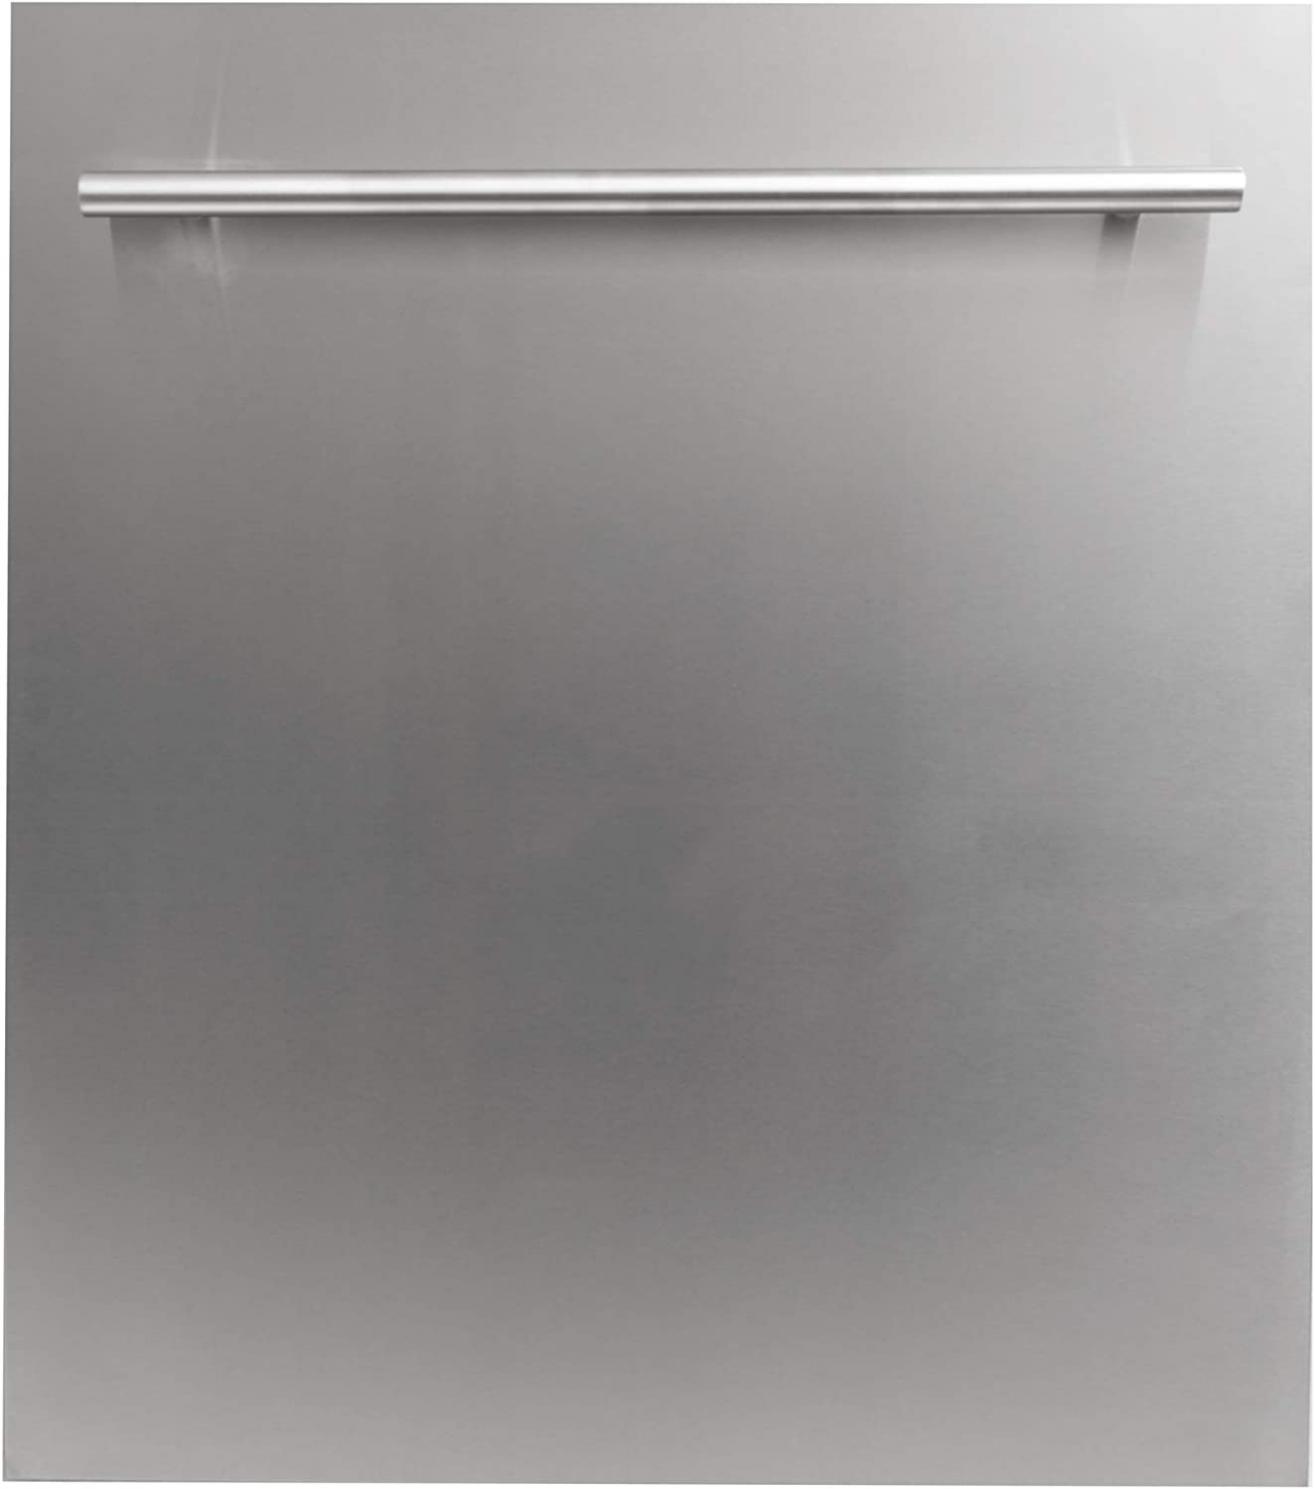 ZLINE DW-SN-24 DuraSnow Stainless Steel 24 Inch Built In Dishwasher with 6 Different Wash Cycles, Adjustable Upper Rack, and Top Control Panel, Silver